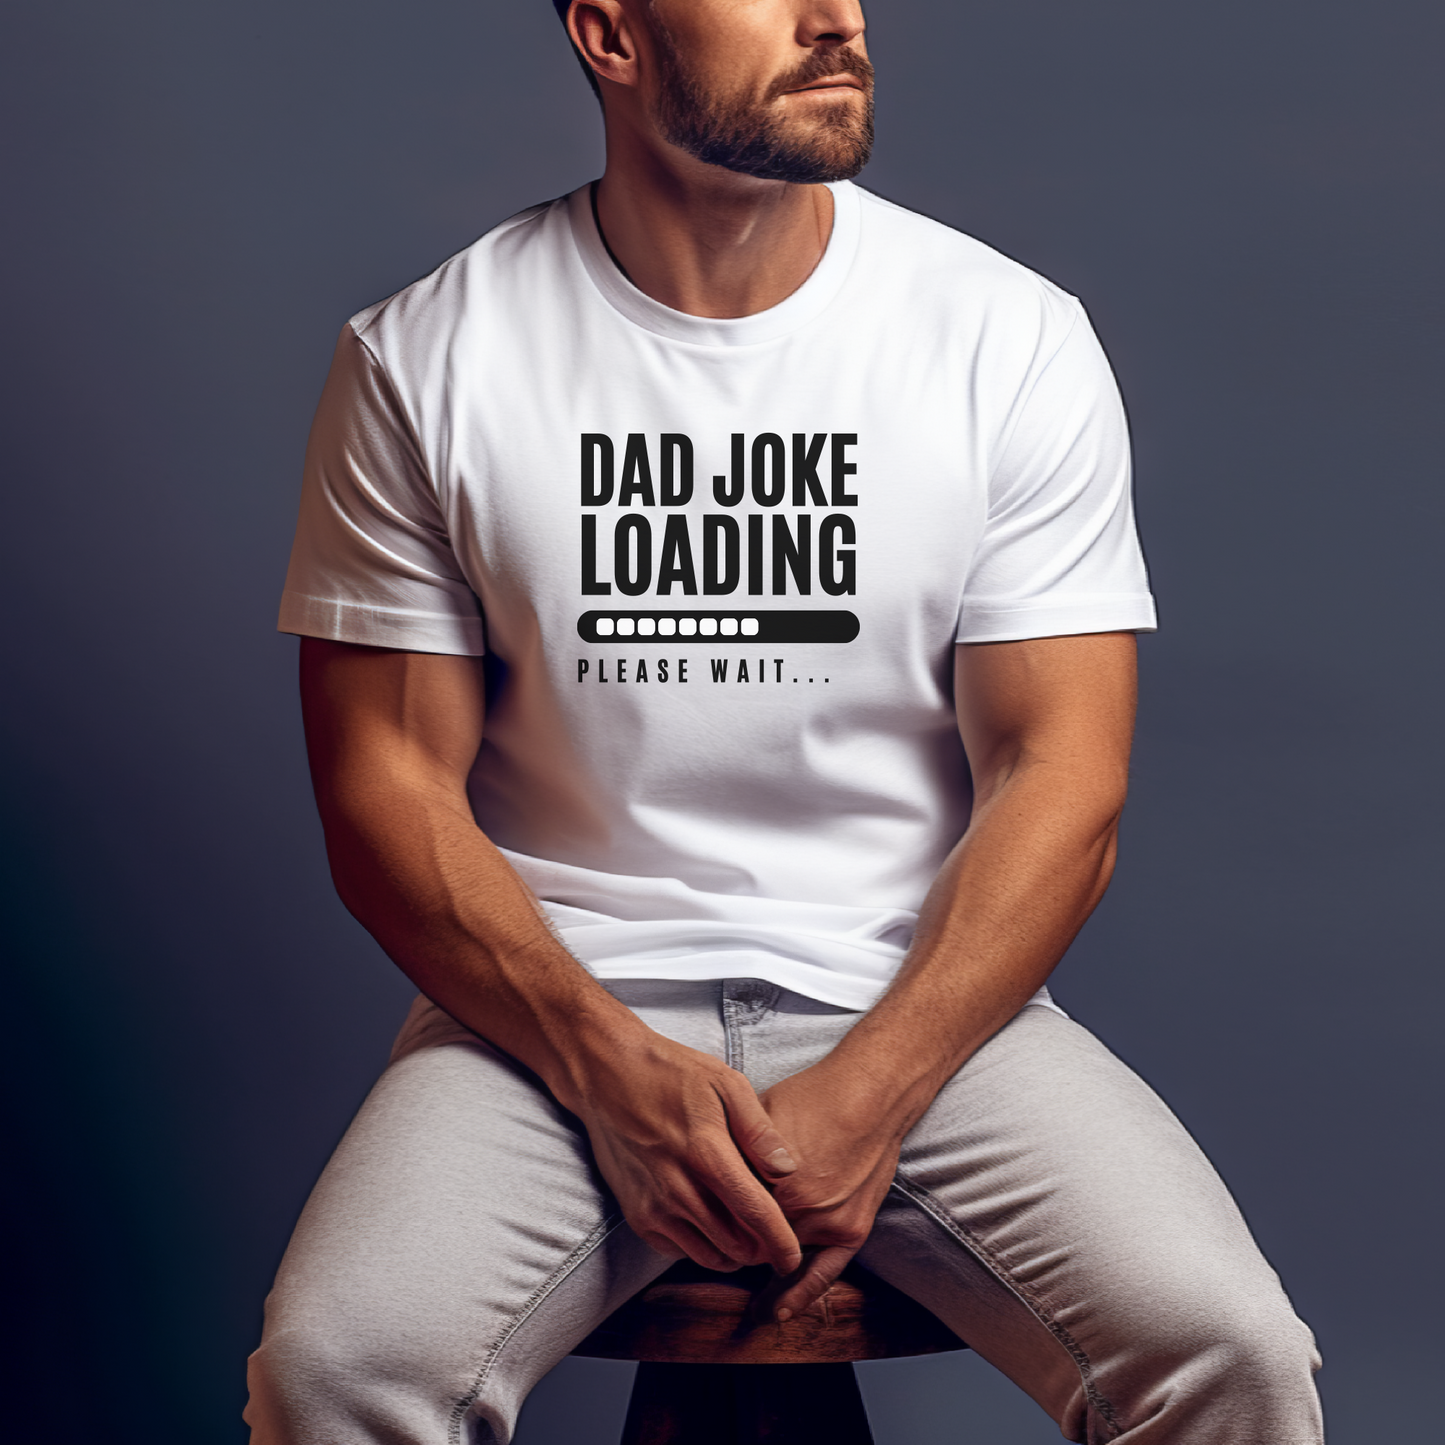 Dad Joke Loading Shirt, Not a Morning Person, Sarcastic Funny Shirt for Men, Best Dad Ever Tee, Fathers Day Gift, Dad Birthday Gift, Dad Bod